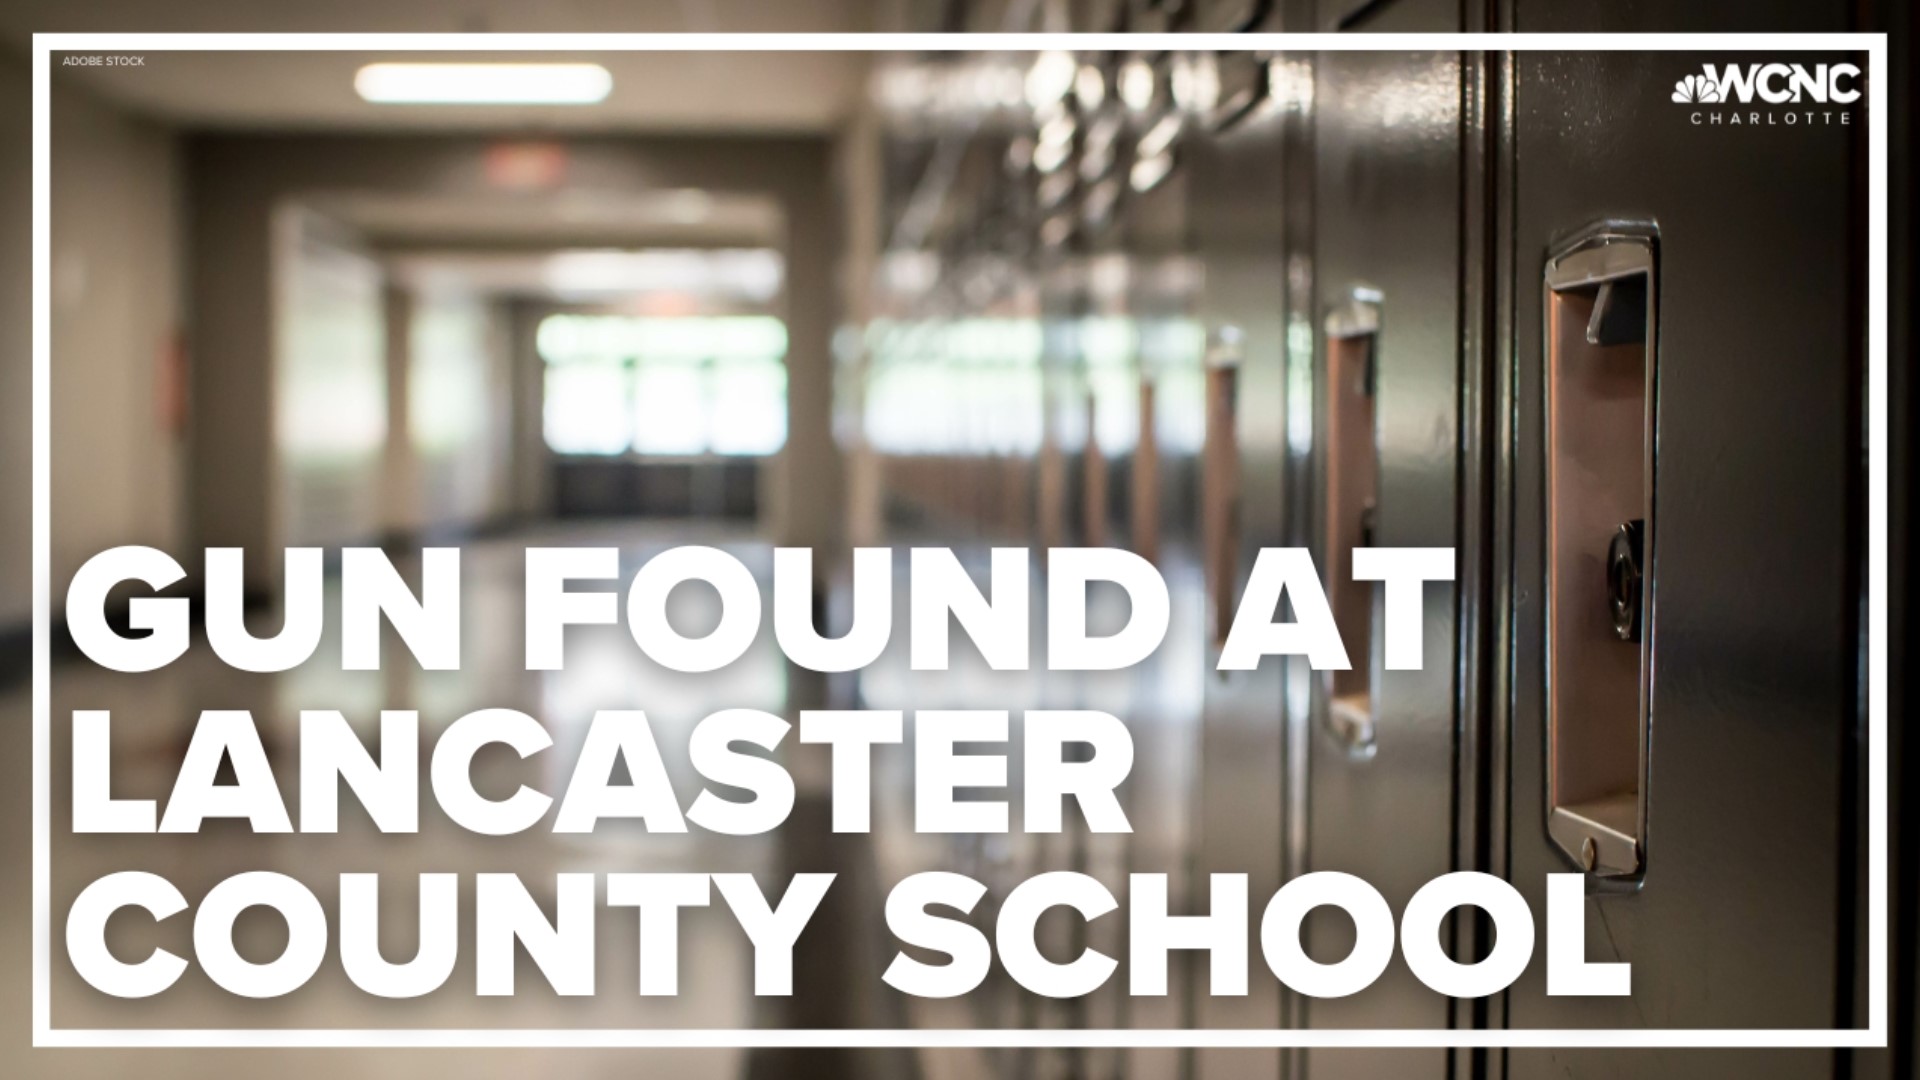 The Lancaster County Sheriff's Office confirmed the student had a 9 mm semiautomatic pistol with a loaded magazine. A round was not chambered.